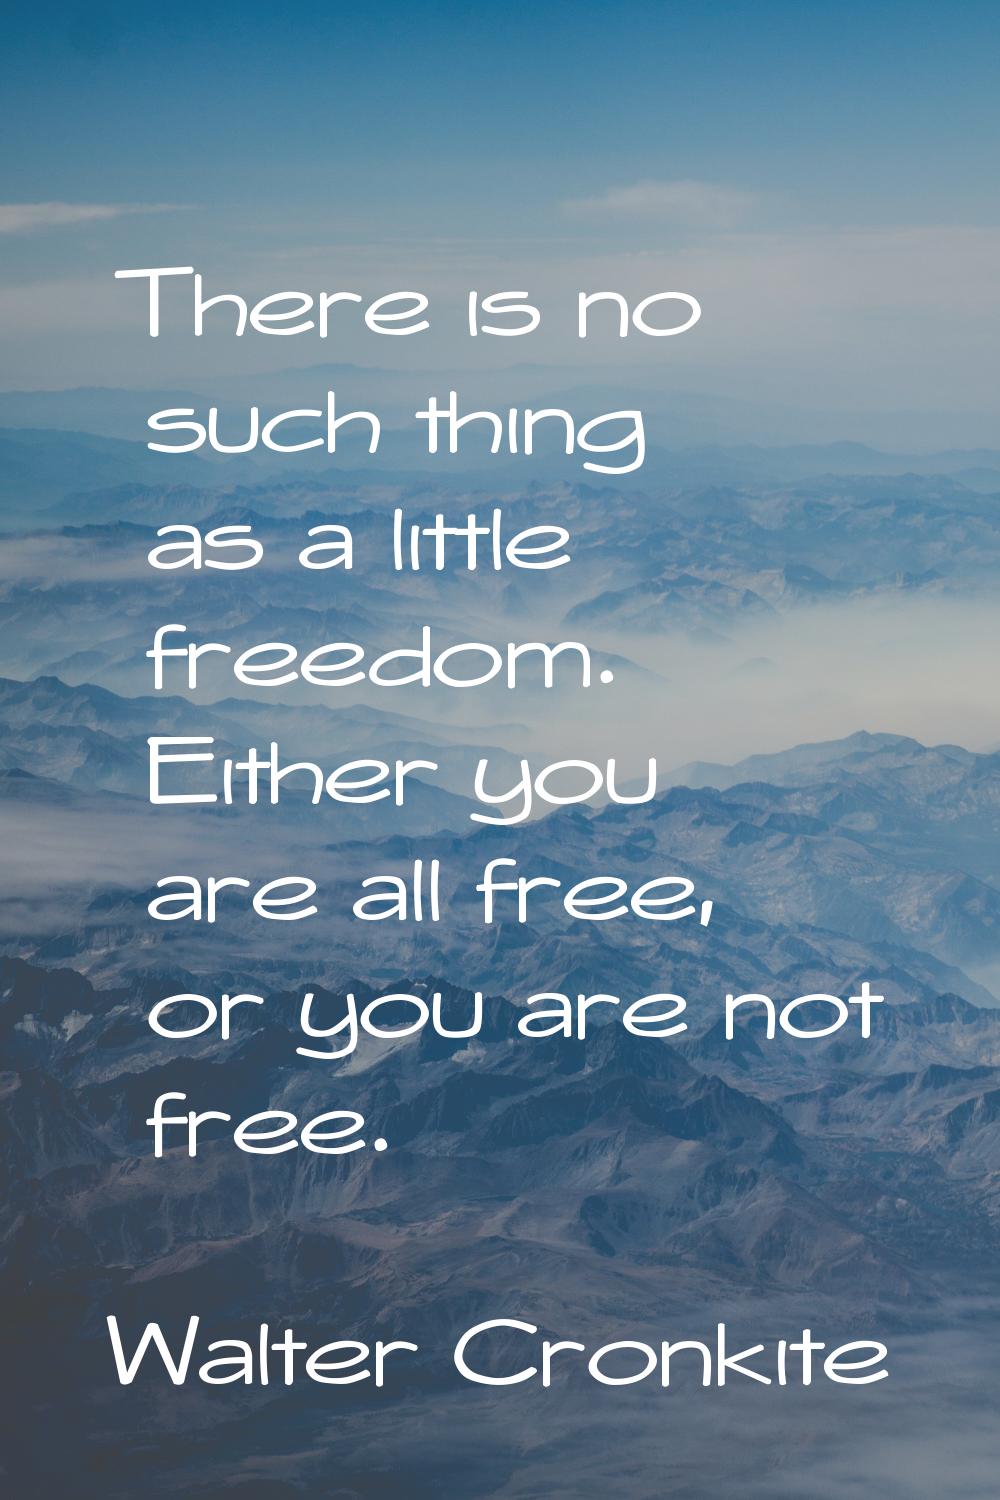 There is no such thing as a little freedom. Either you are all free, or you are not free.